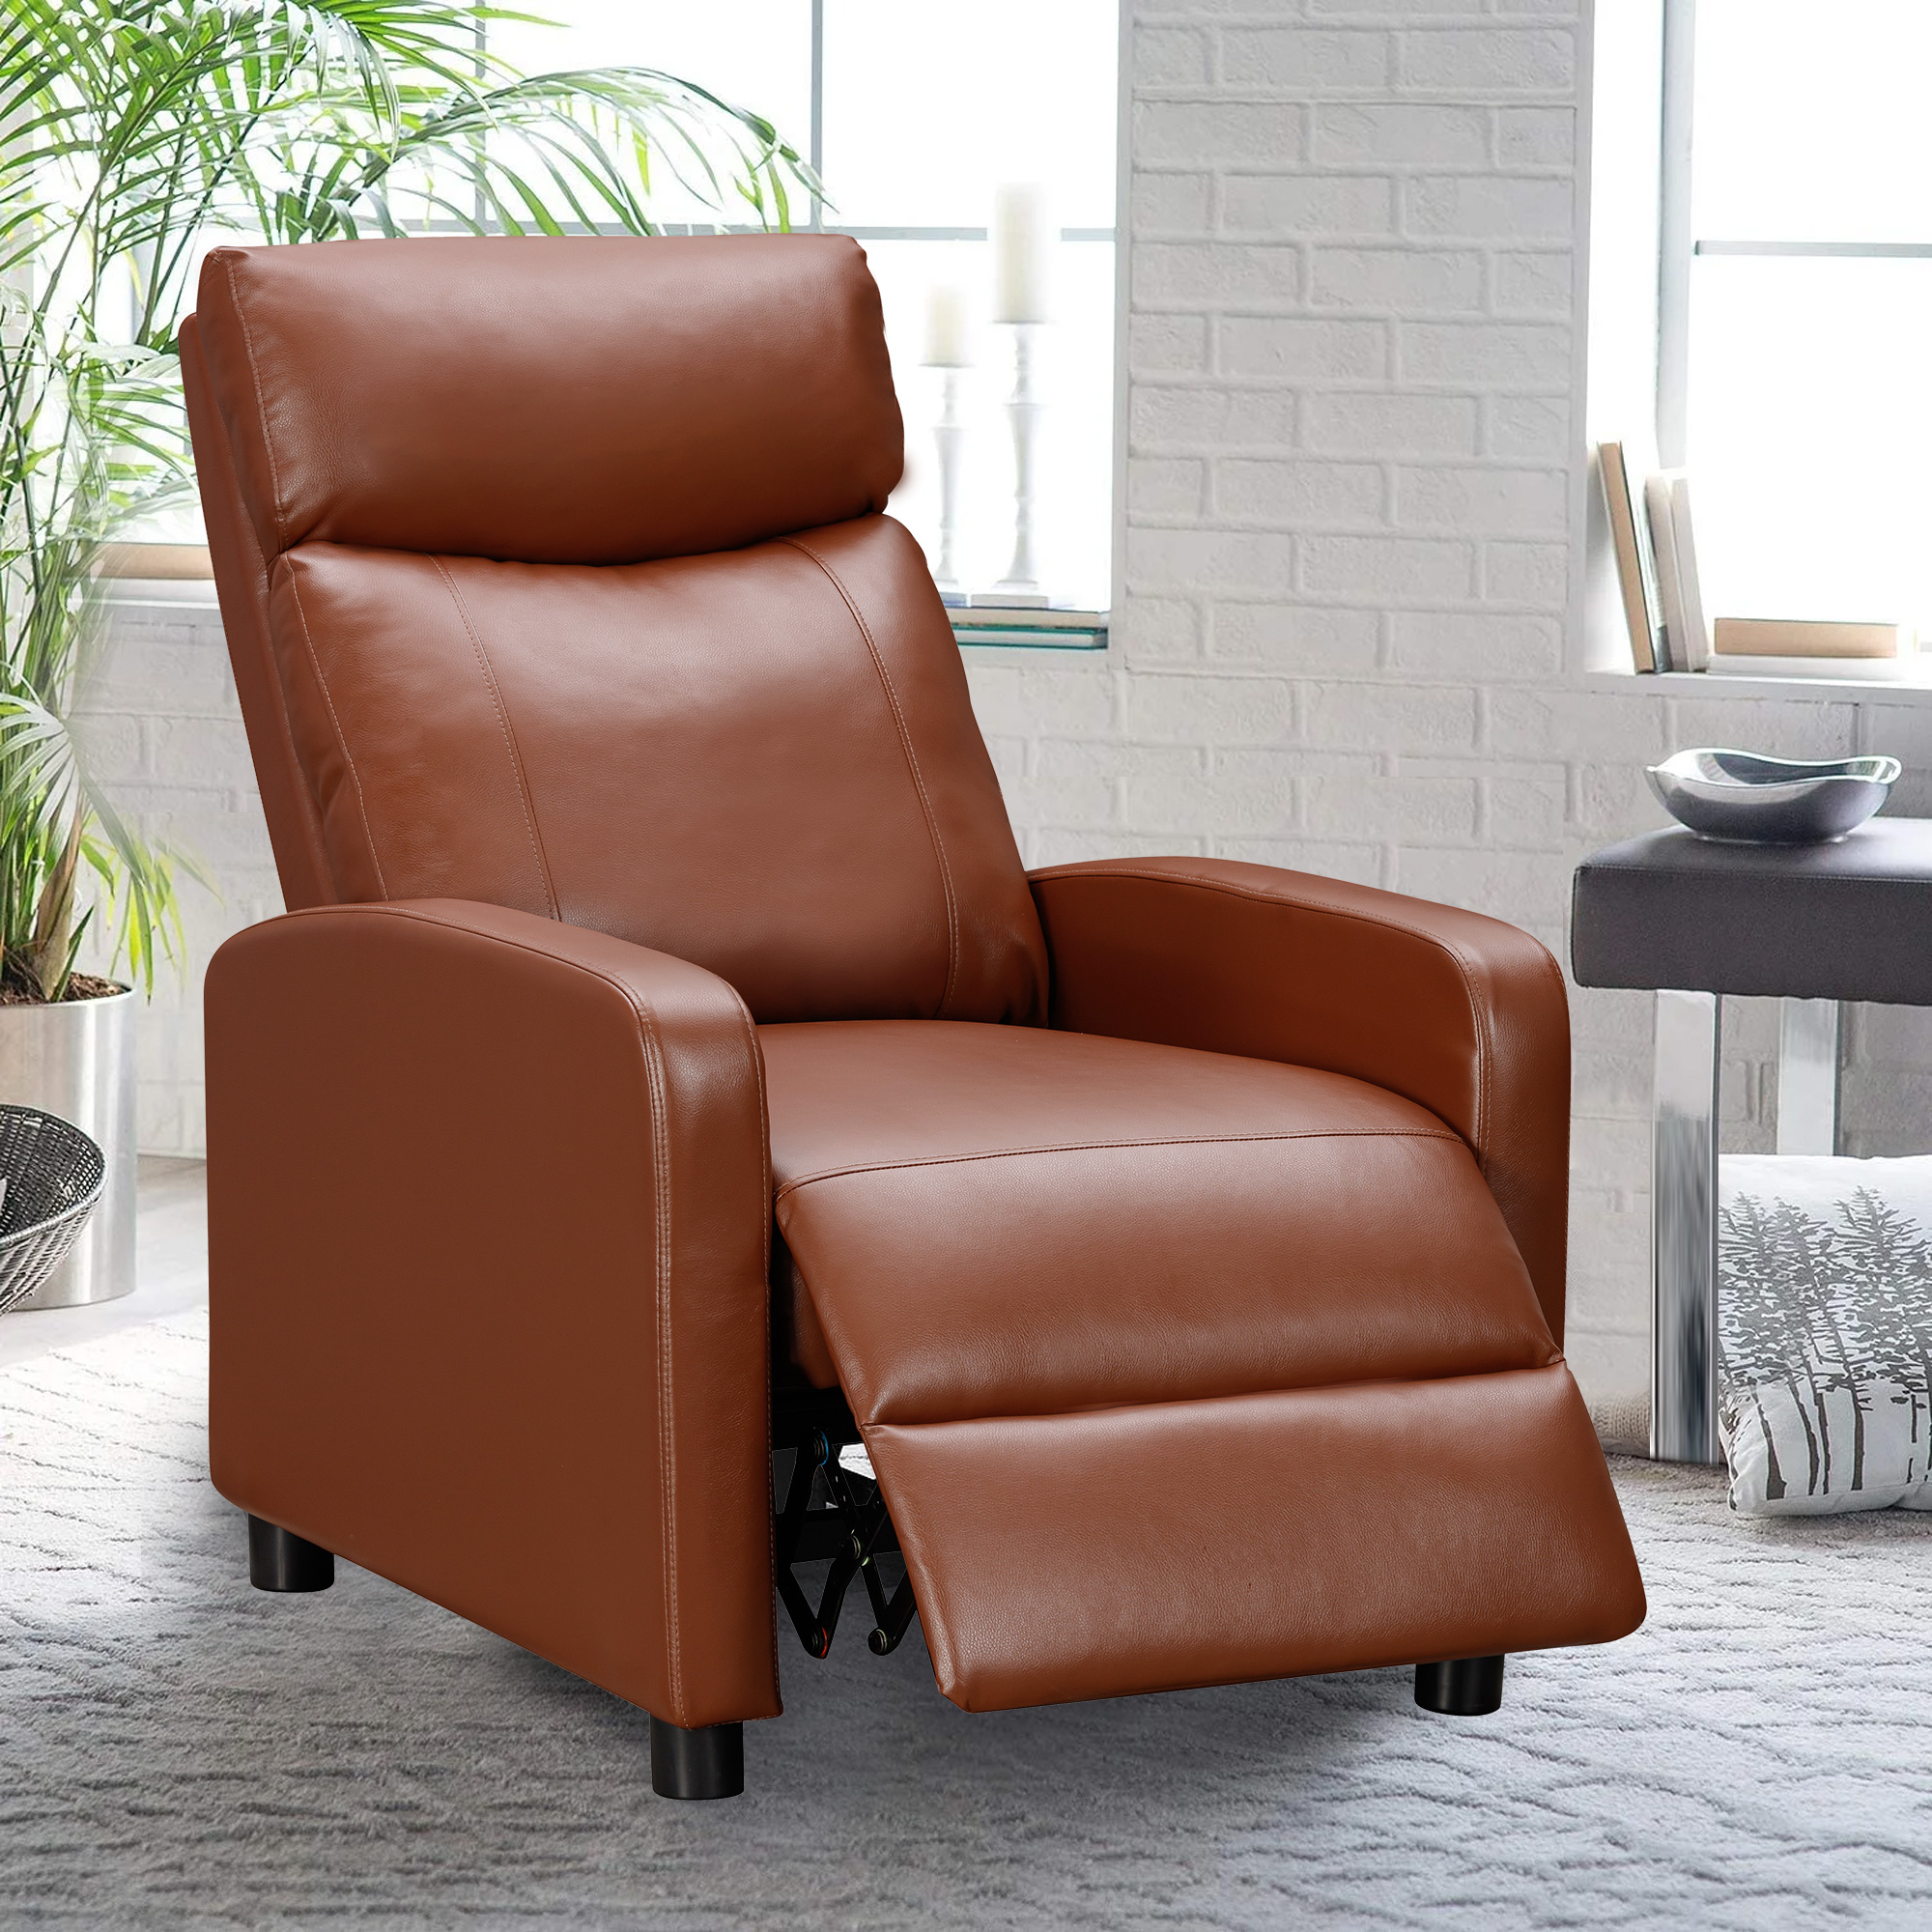 Comhoma Push Back Theater Adjustable Recliner w/ Footrest (3 Colors) $99 + Free Shipping @ Walmart